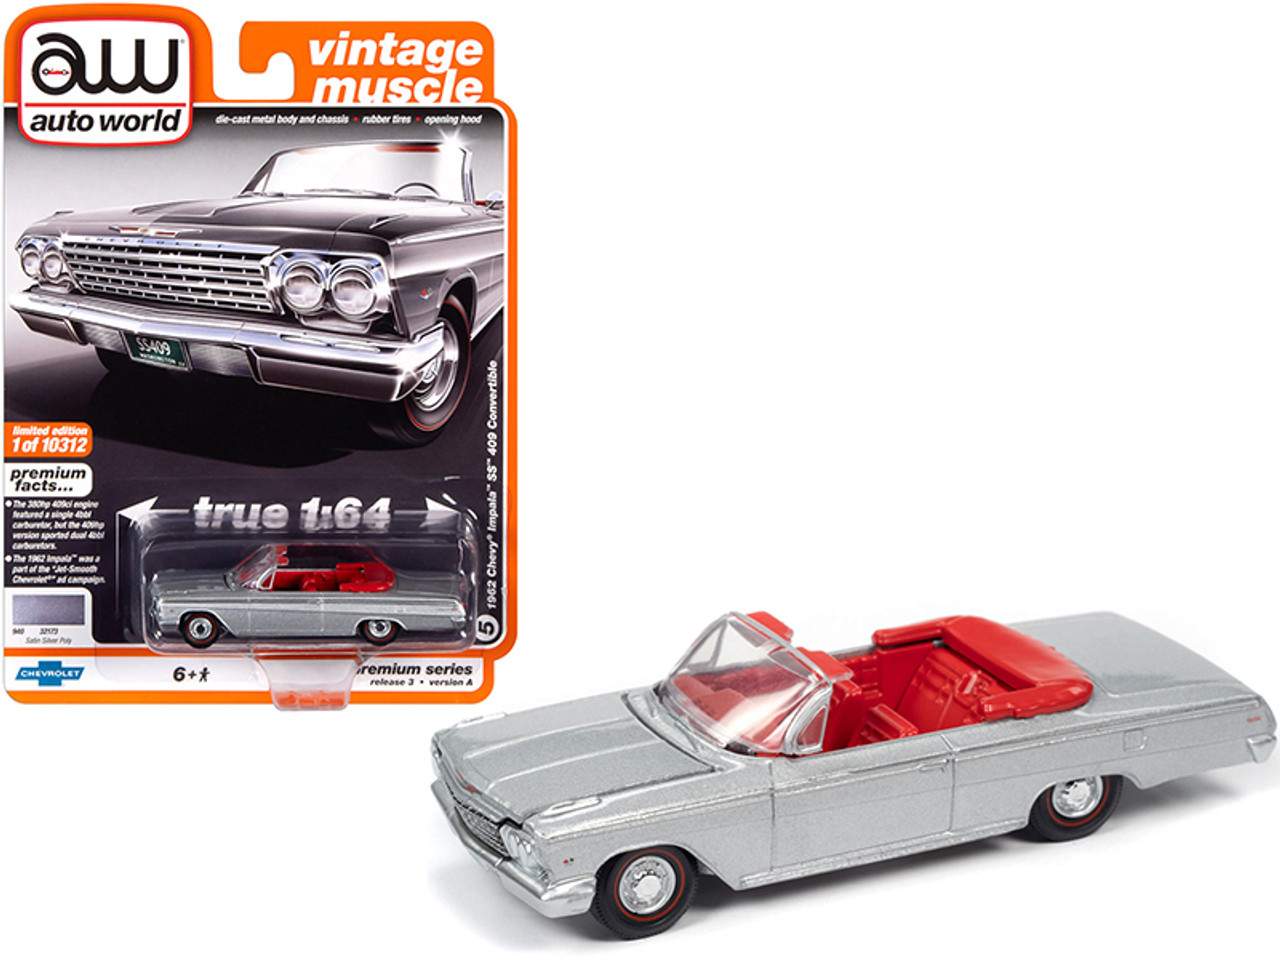 1962 Chevrolet Impala SS 409 Convertible Satin Silver Metallic with Red Interior "Vintage Muscle" Limited Edition to 10312 pieces Worldwide 1/64 Diecast Model Car by Autoworld